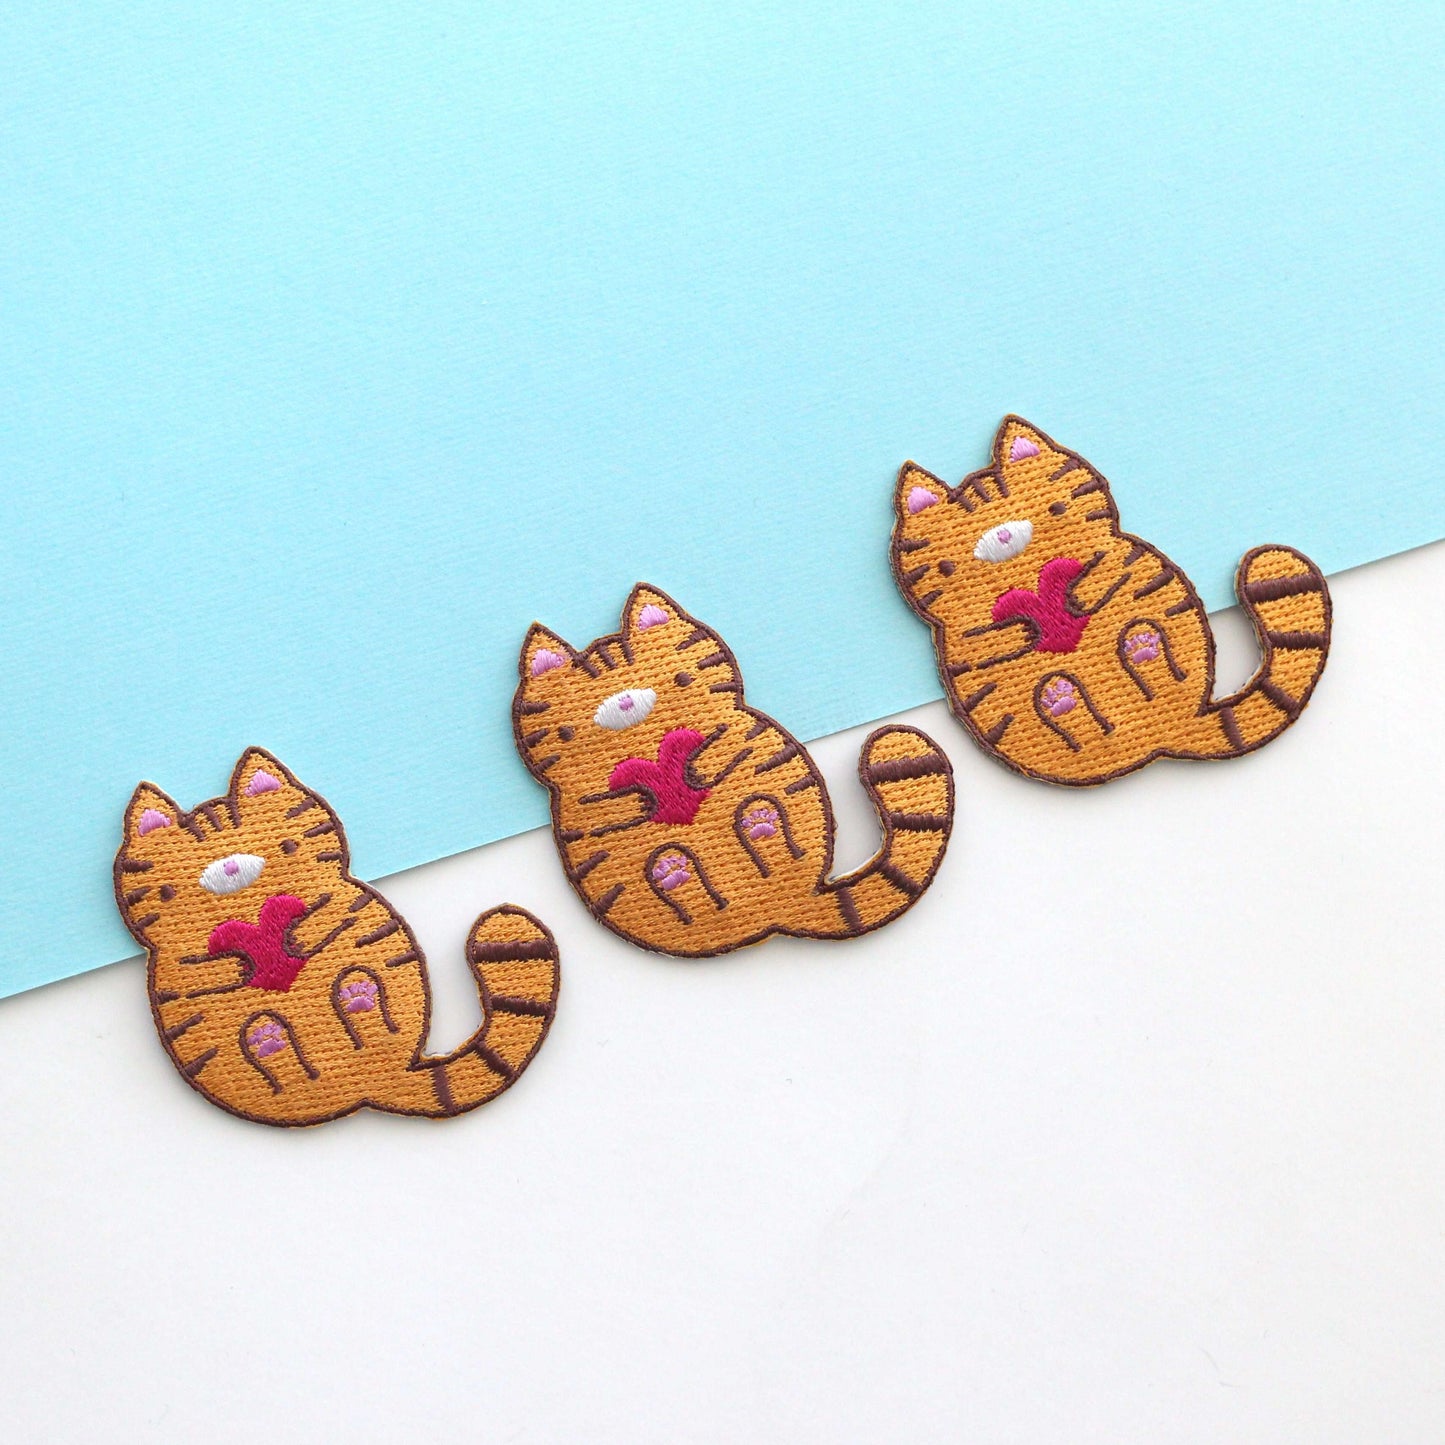 Orange Tabby Cat Embroidered Iron-On Patch - Cute Patch For Denims by Wild Whimsy Woolies